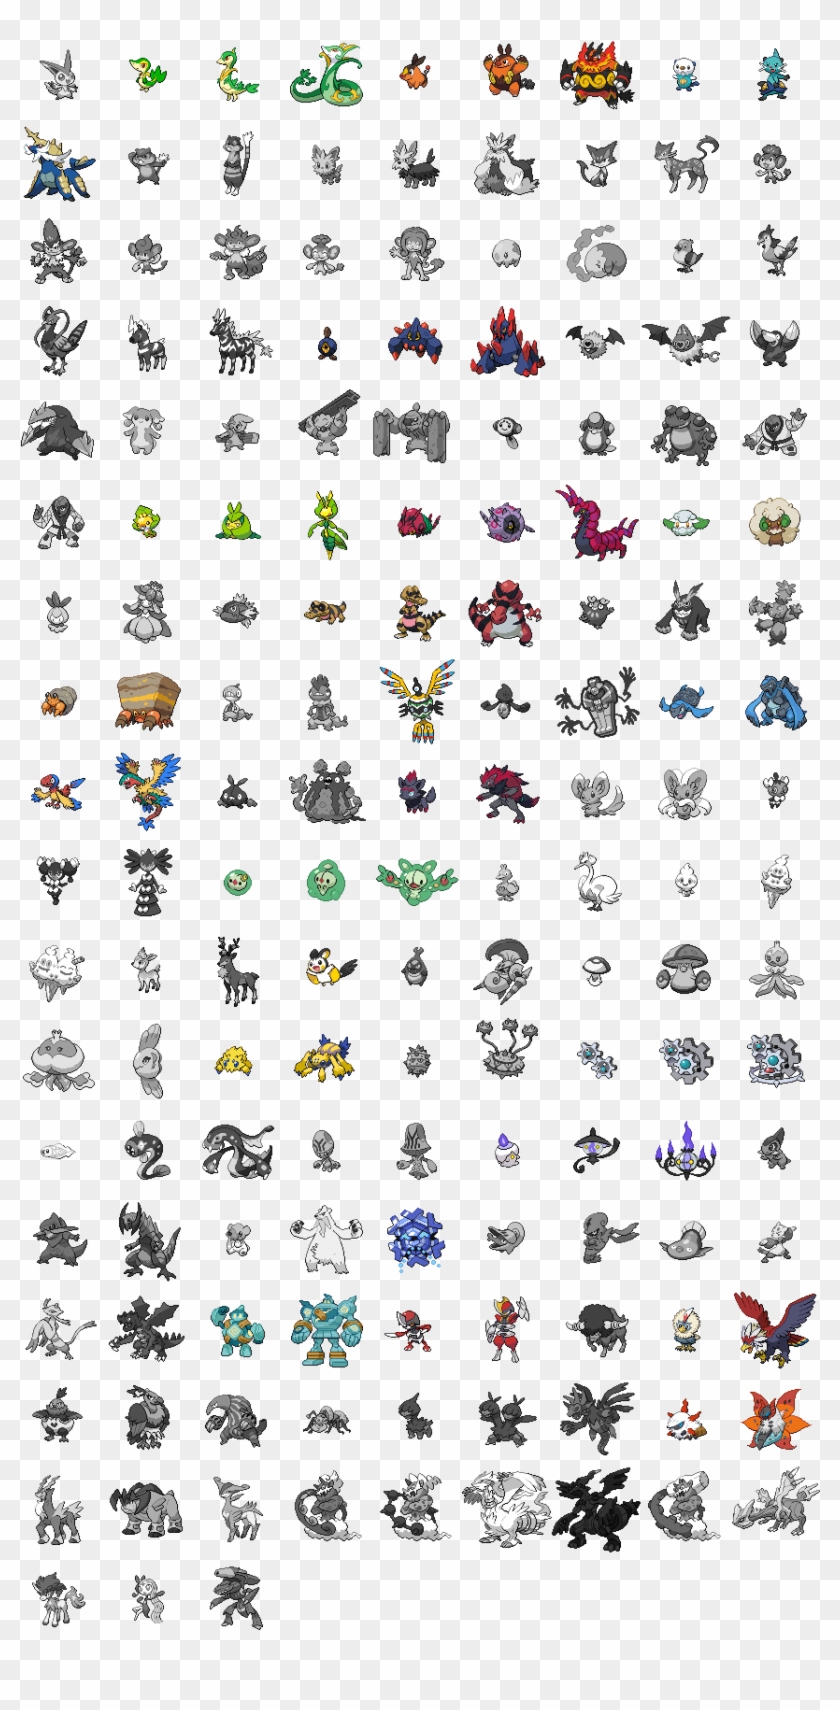 Ap5 New Pokemon Go Evolution Chart Hd Png Download 864x1728 4392118 Pngfind